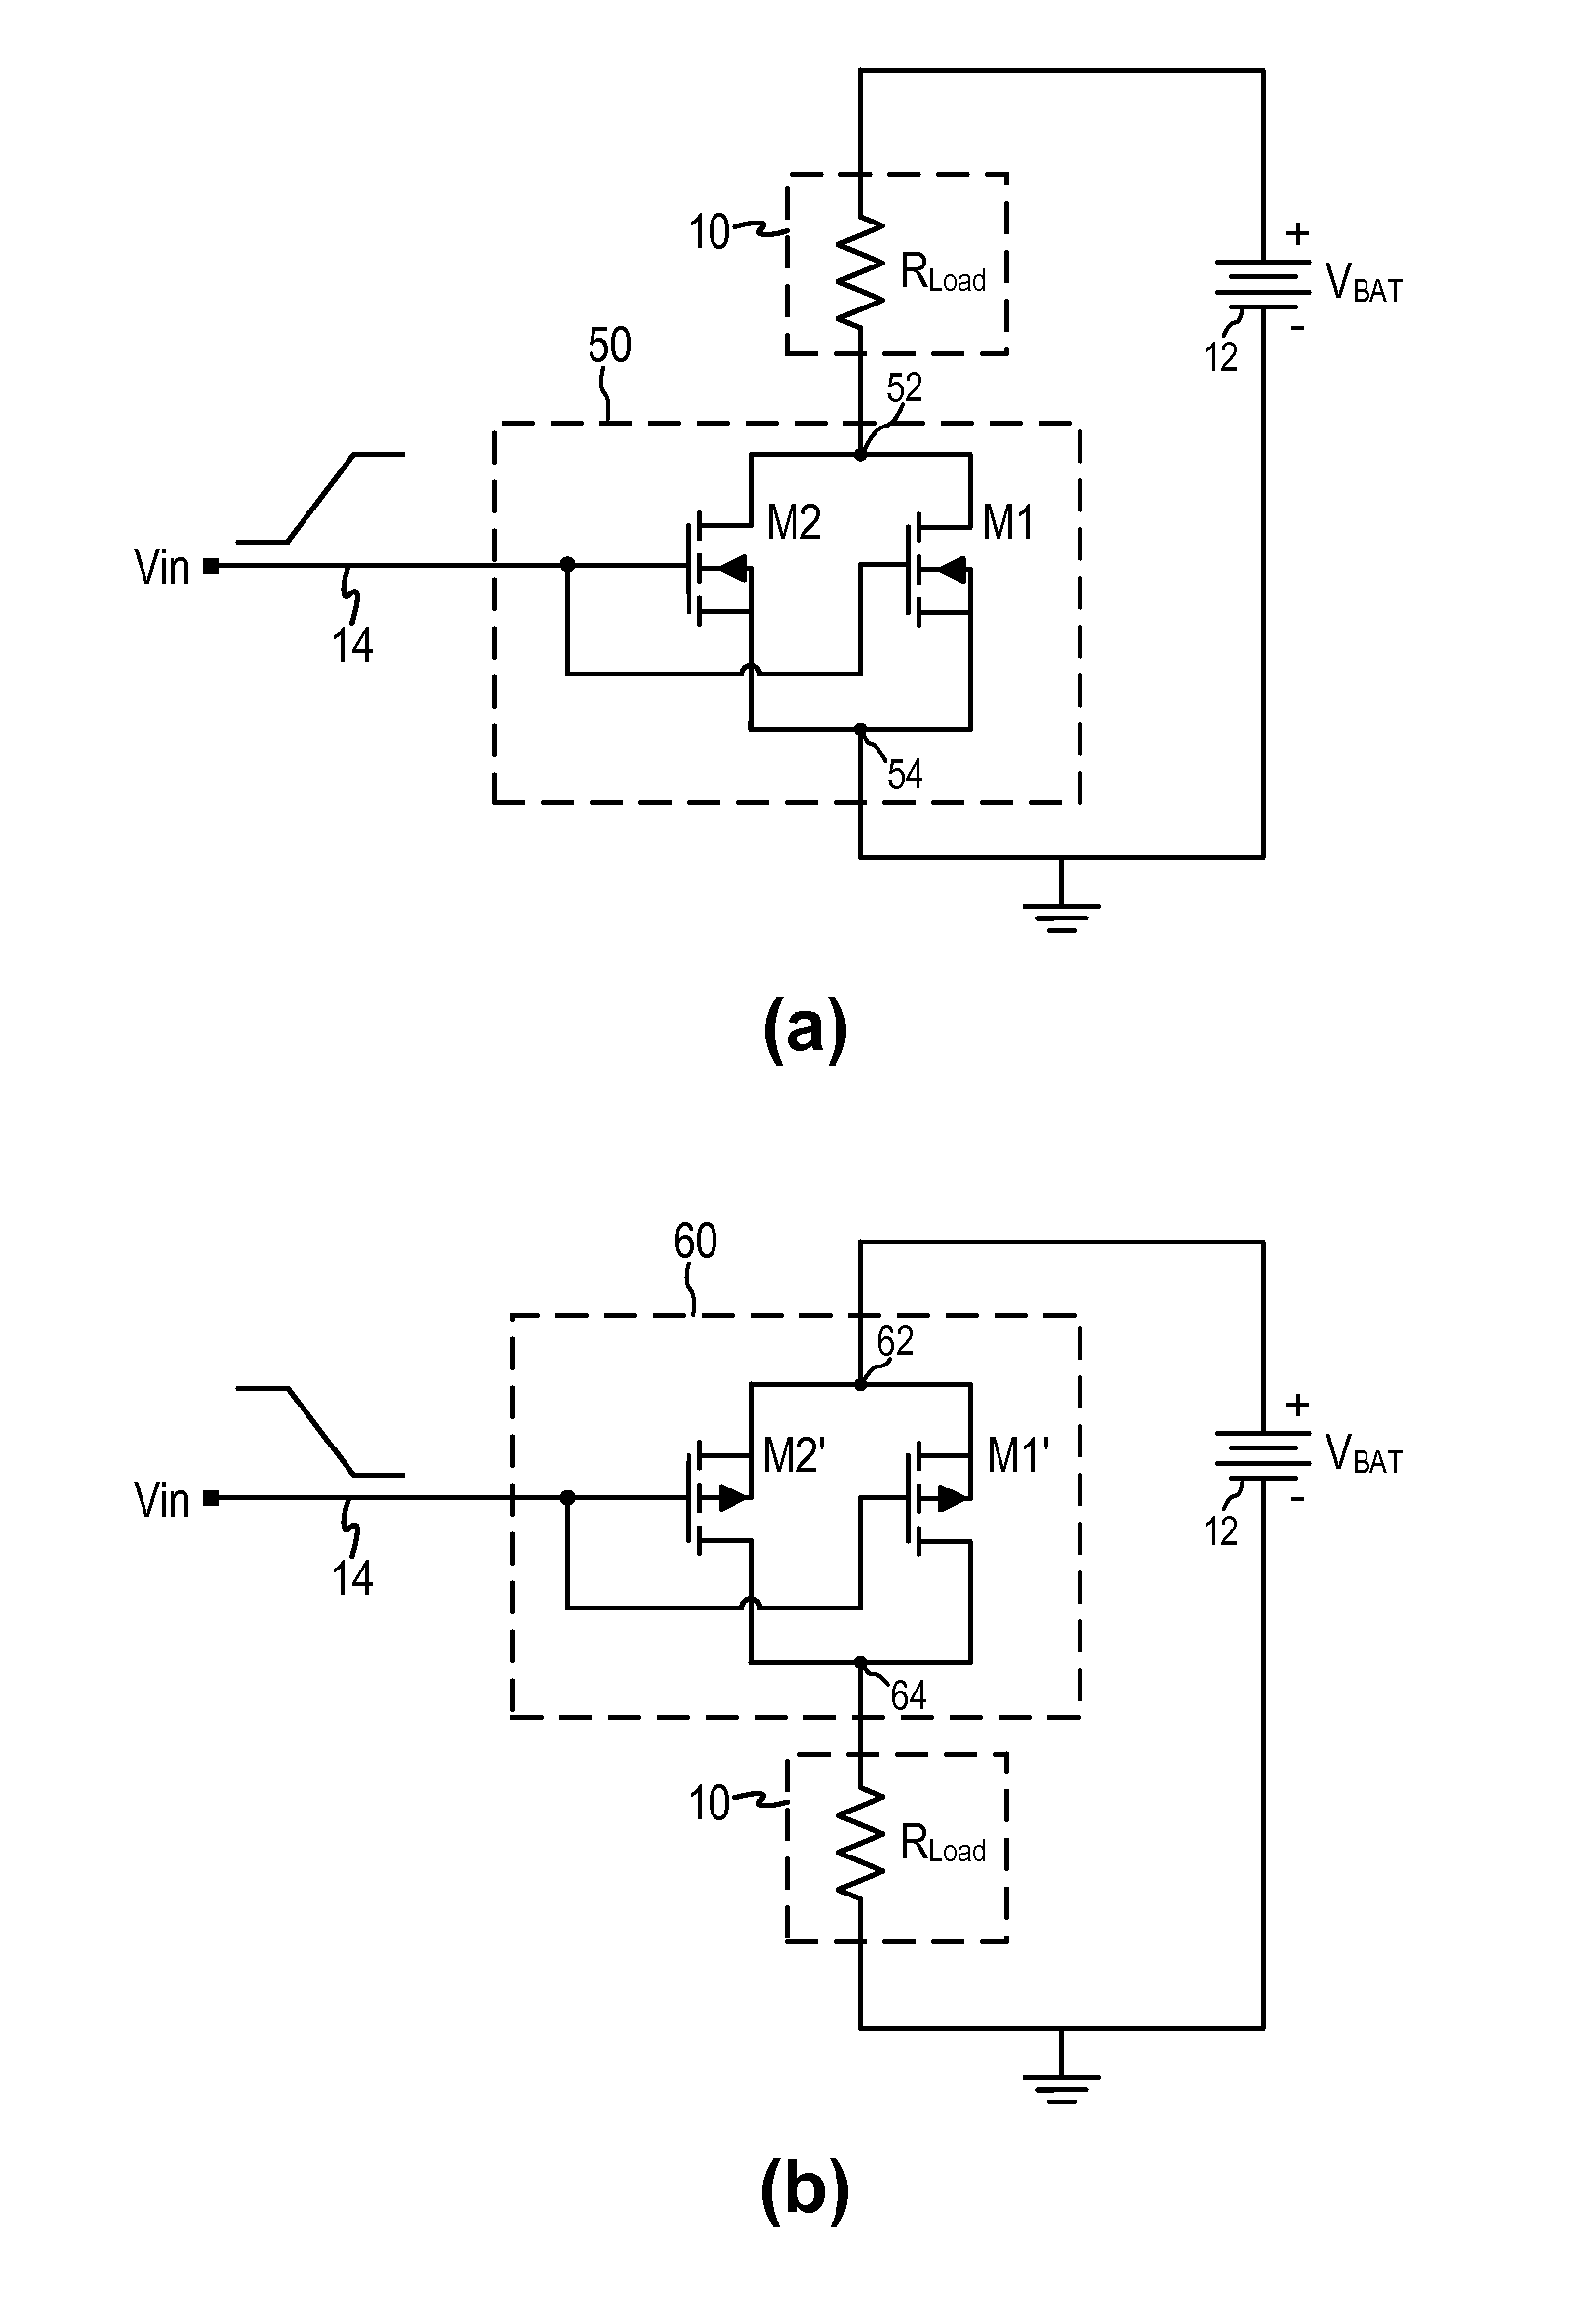 Mosfet switch circuit for slow switching application